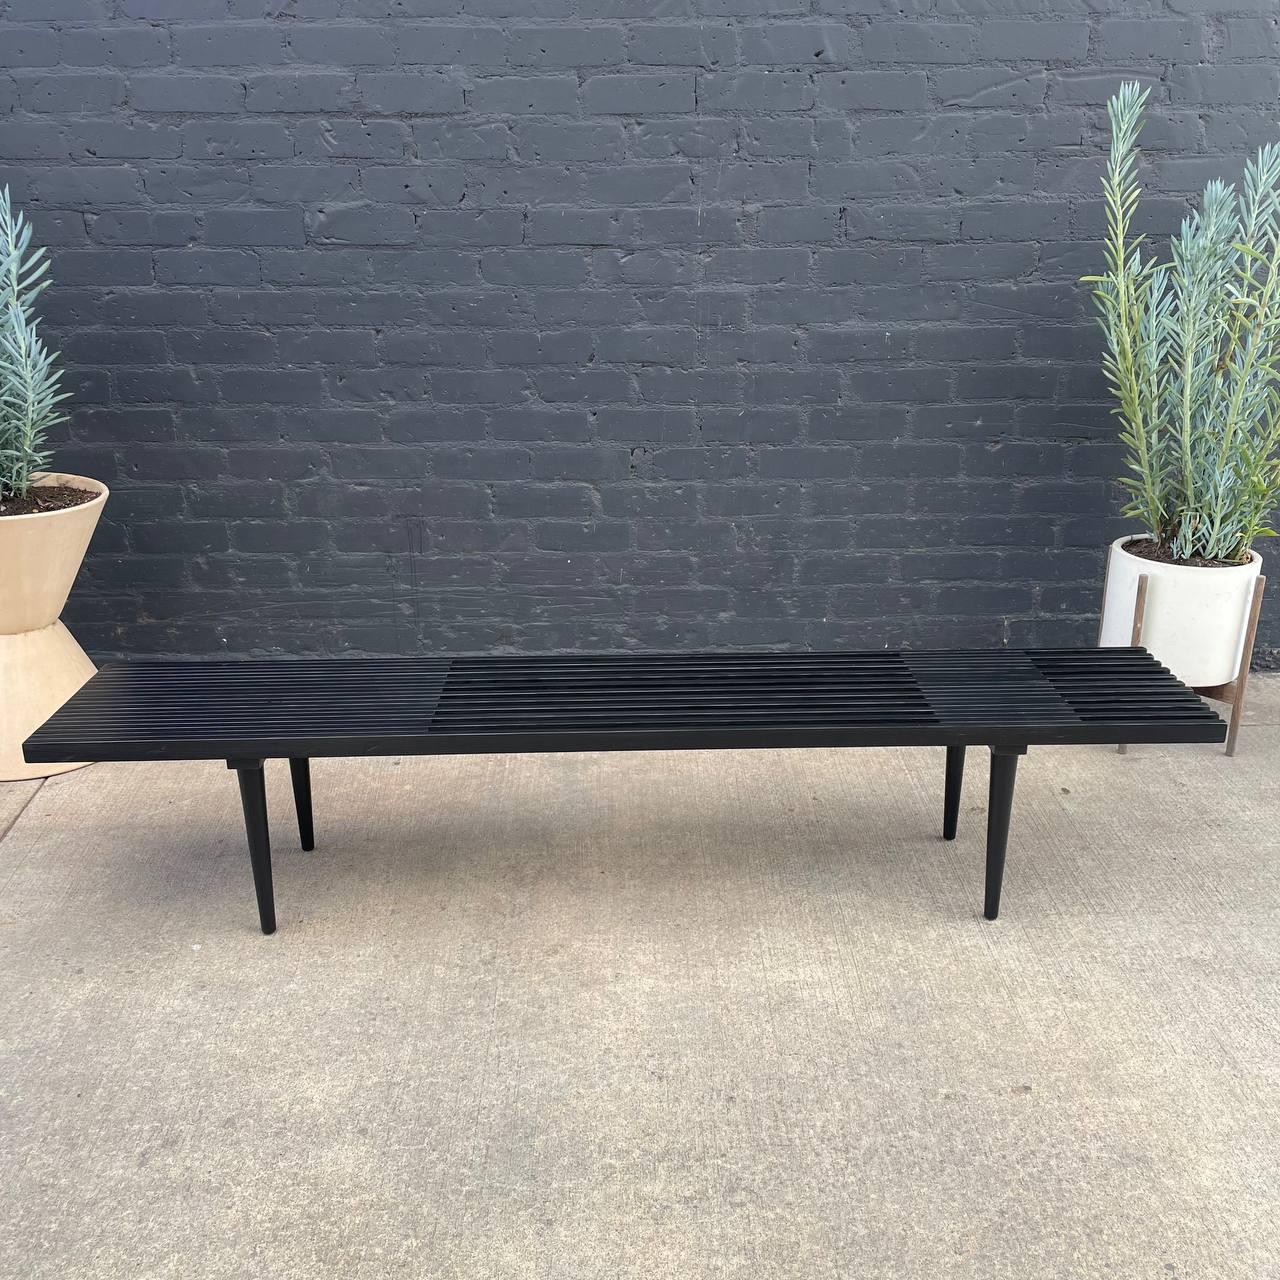 Mid-20th Century Newly Refinished - Mid-Century Modern Black Slatted Bench or Coffee Table